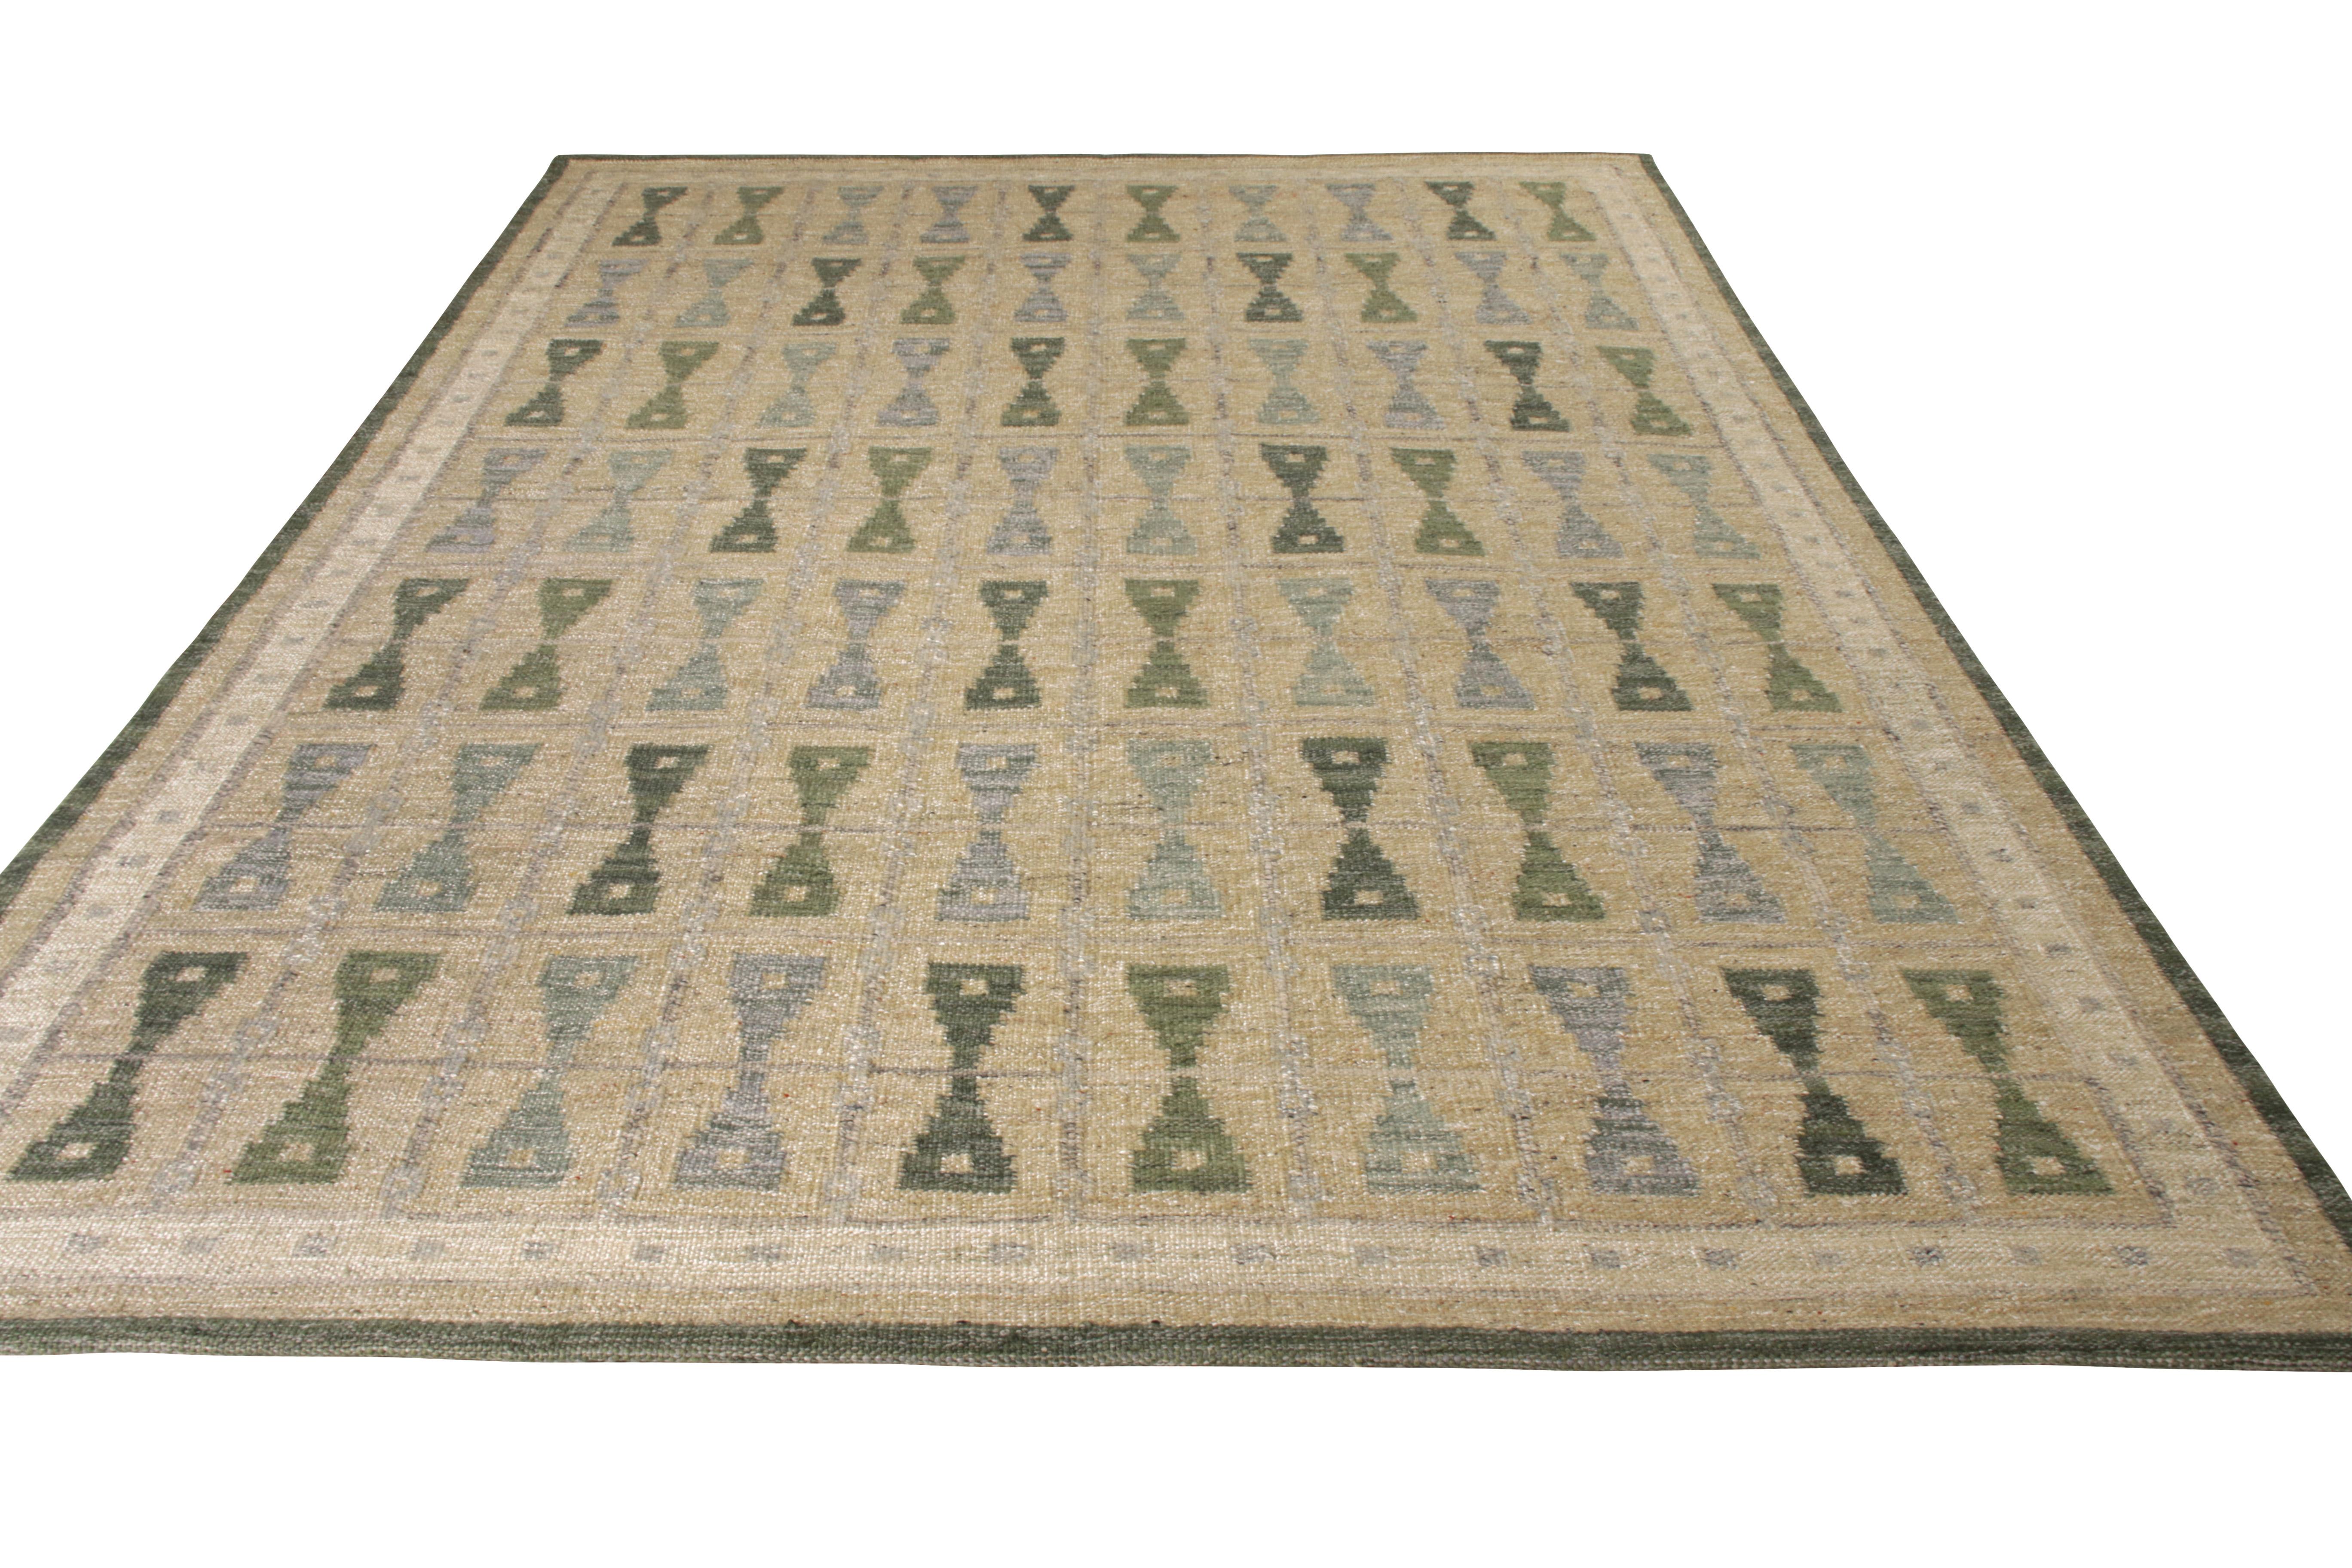 Sized at 9 x 12, this hand-knotted wool Kilim rug is a graceful addition to the Scandinavian Collection by Rug and Kilim. Inspired by intricate mid century Swedish geometric patterns, this flat weave enjoys soothing tones of beige, green and grey